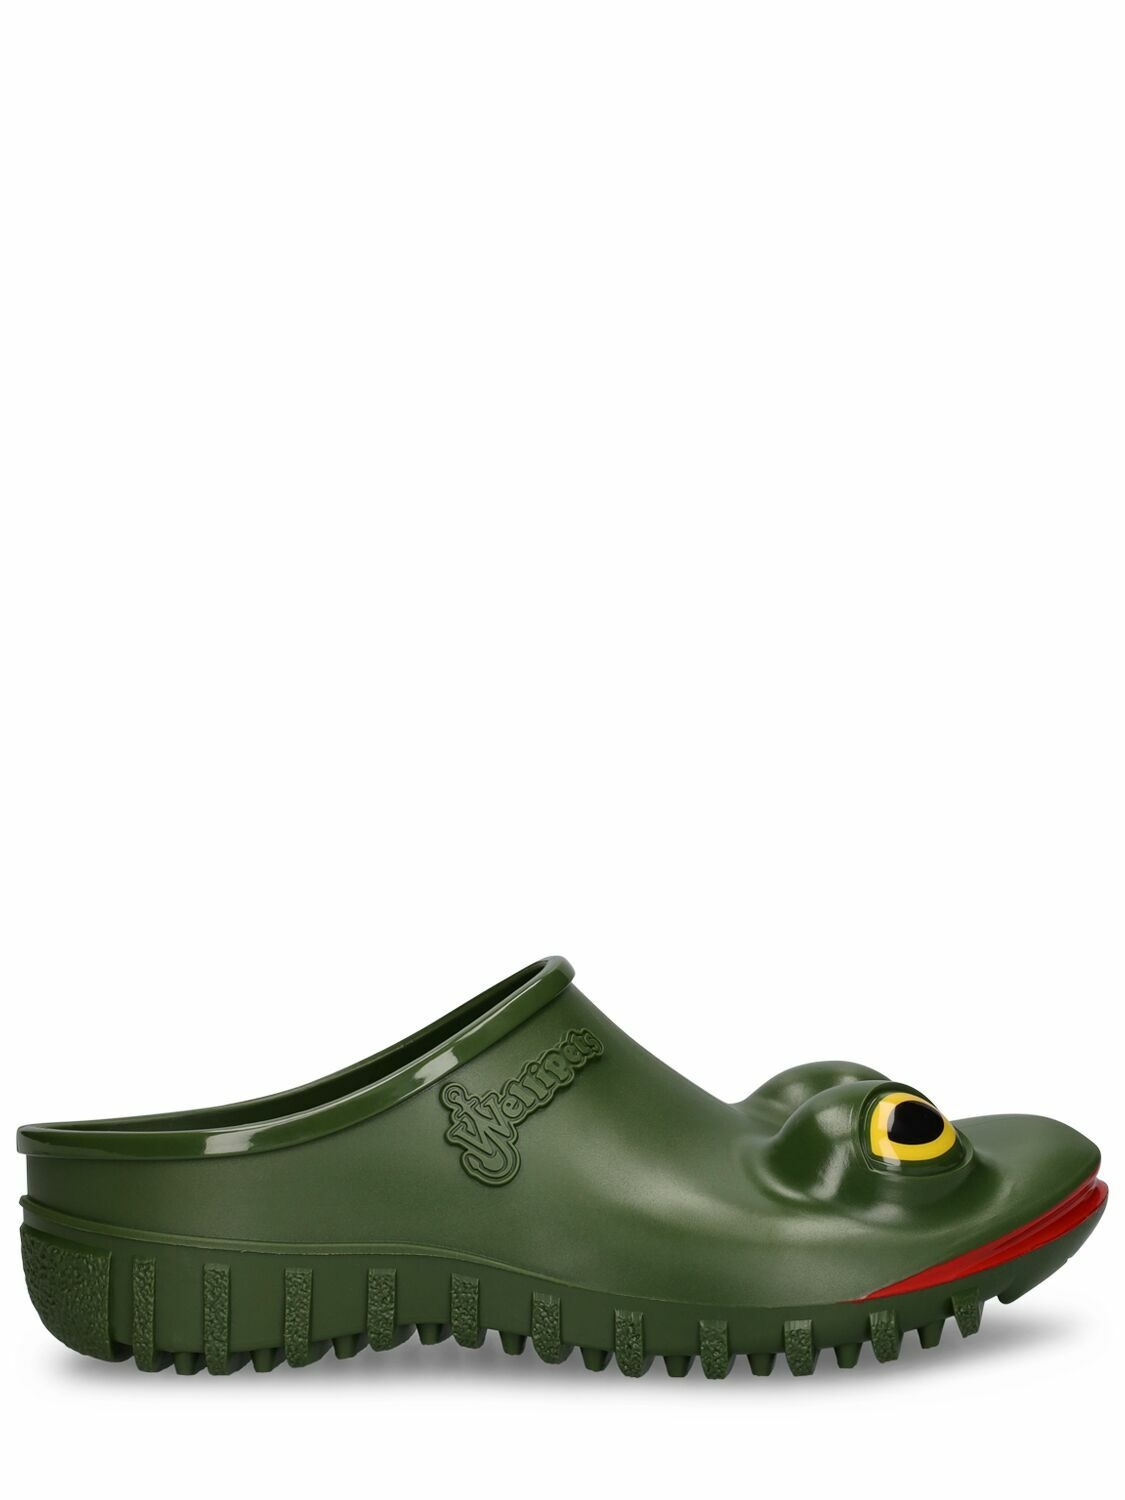 Photo: JW ANDERSON - Jw Anderson X Wellipets Frog Clogs